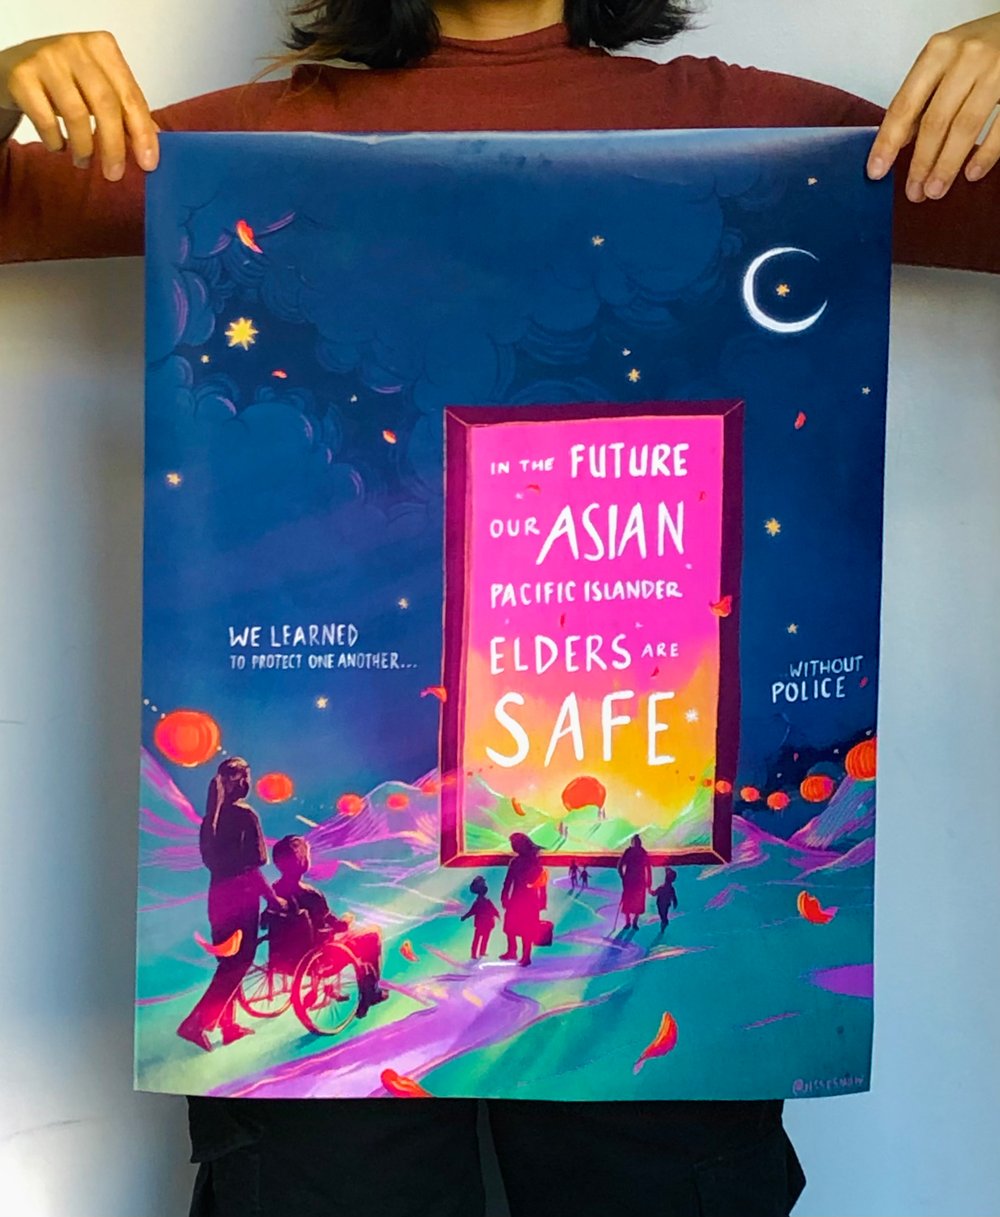 Image of "In the Future Our Asian Pacific Islander Elders are Safe" x Poster